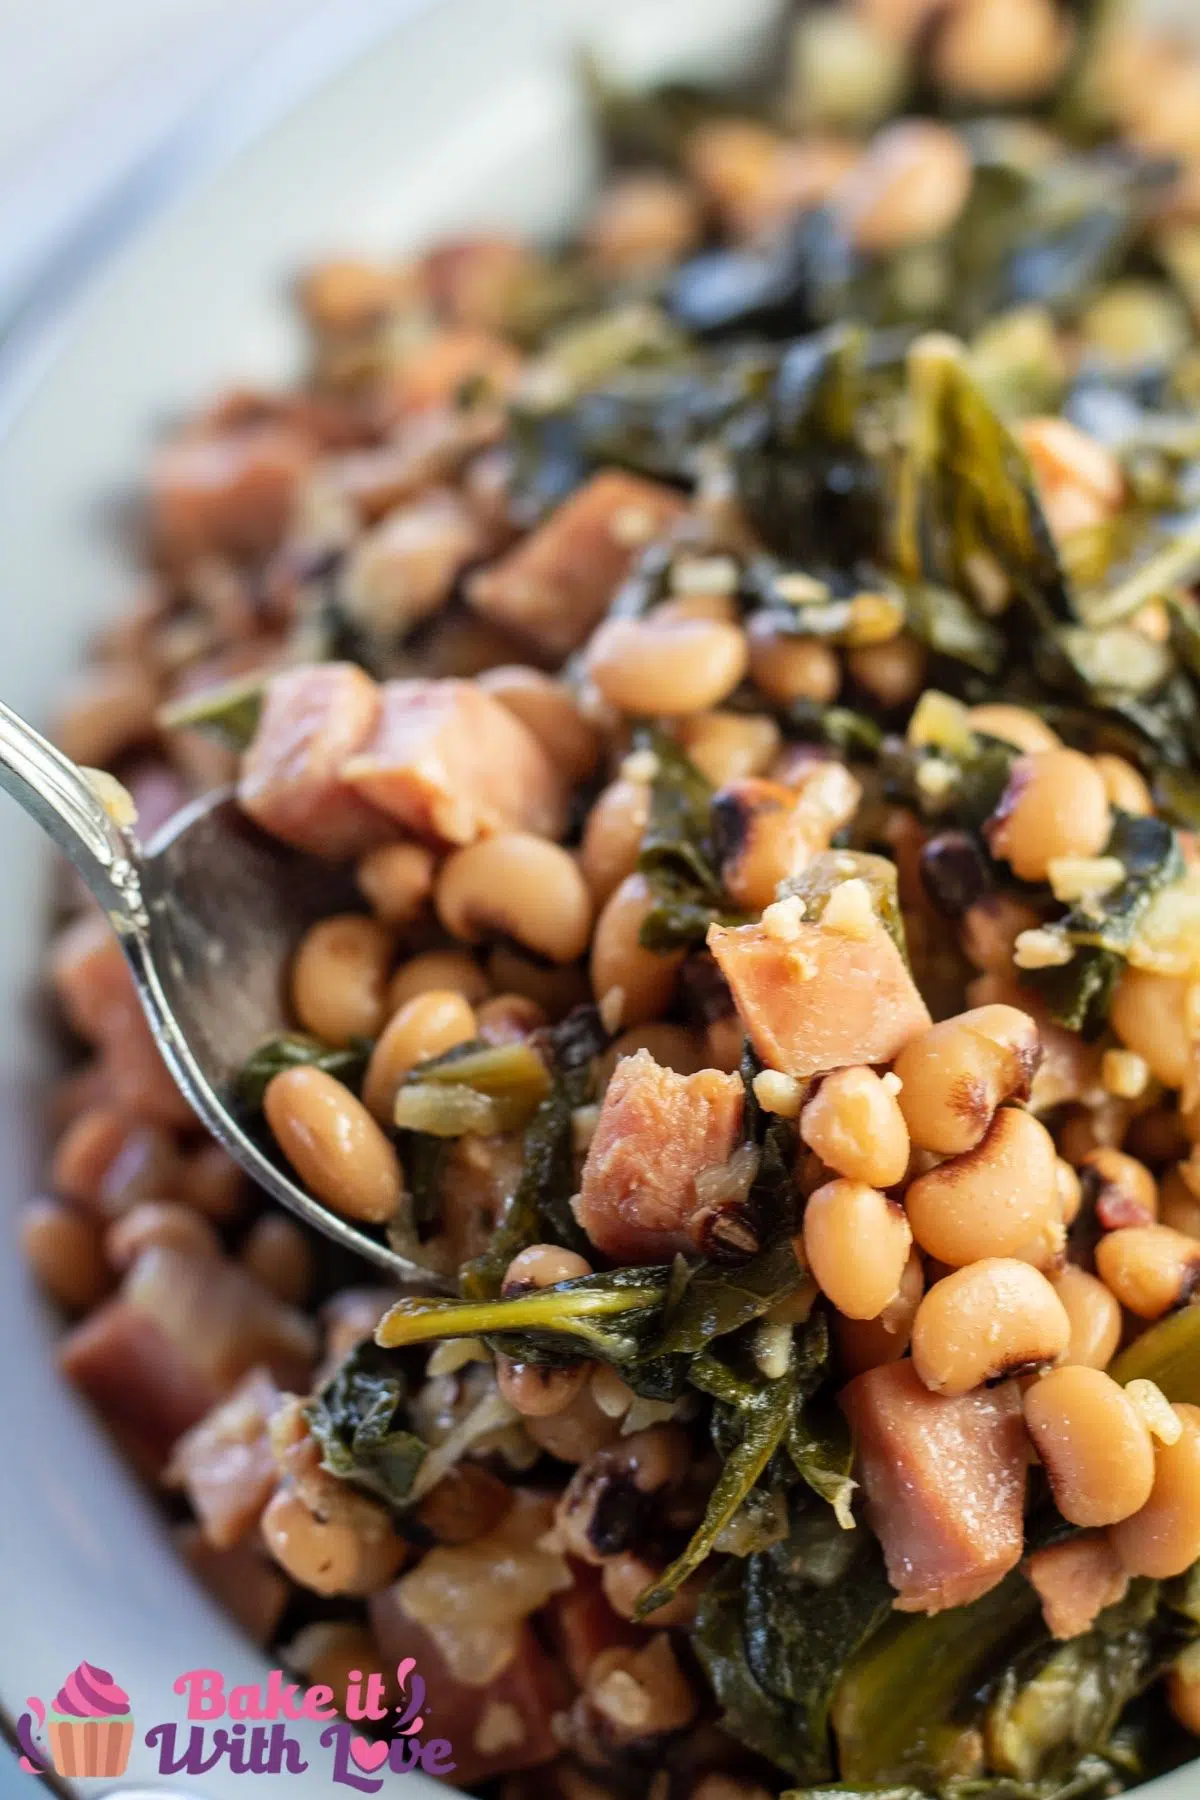 Tall image of the southern black eyed peas and collard greens being dished up.